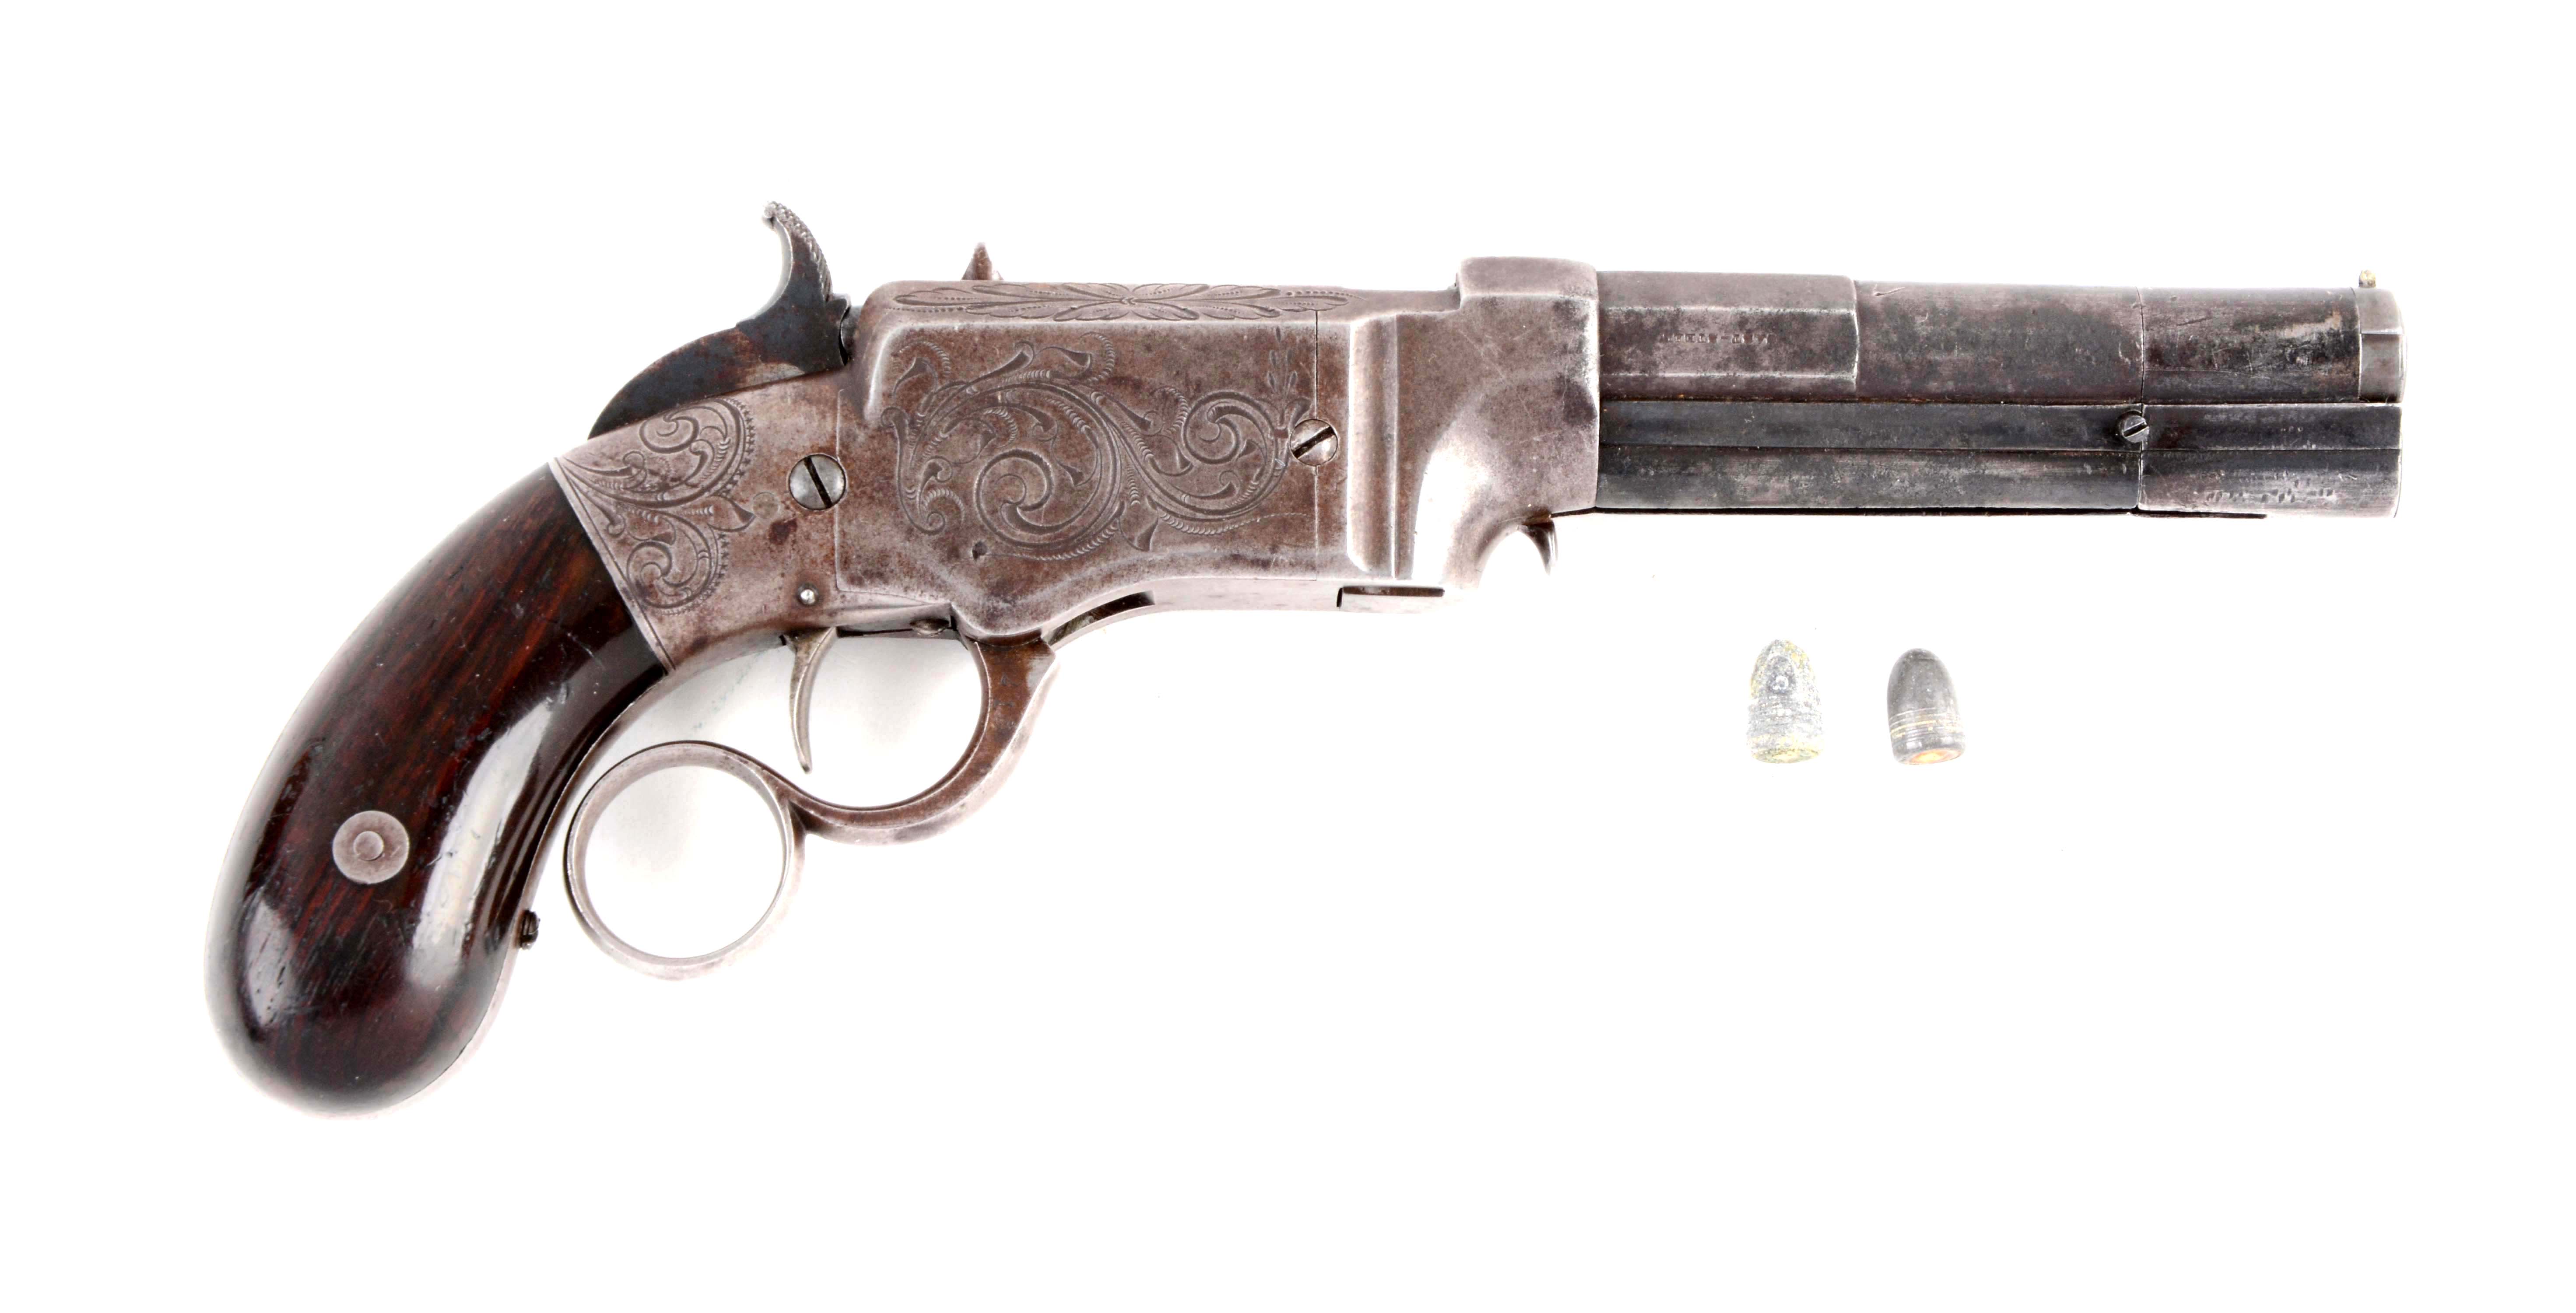 Fine Smith & Wesson Volcanic Repeating Small Frame Pistol, estimated at $12,500-16,500.